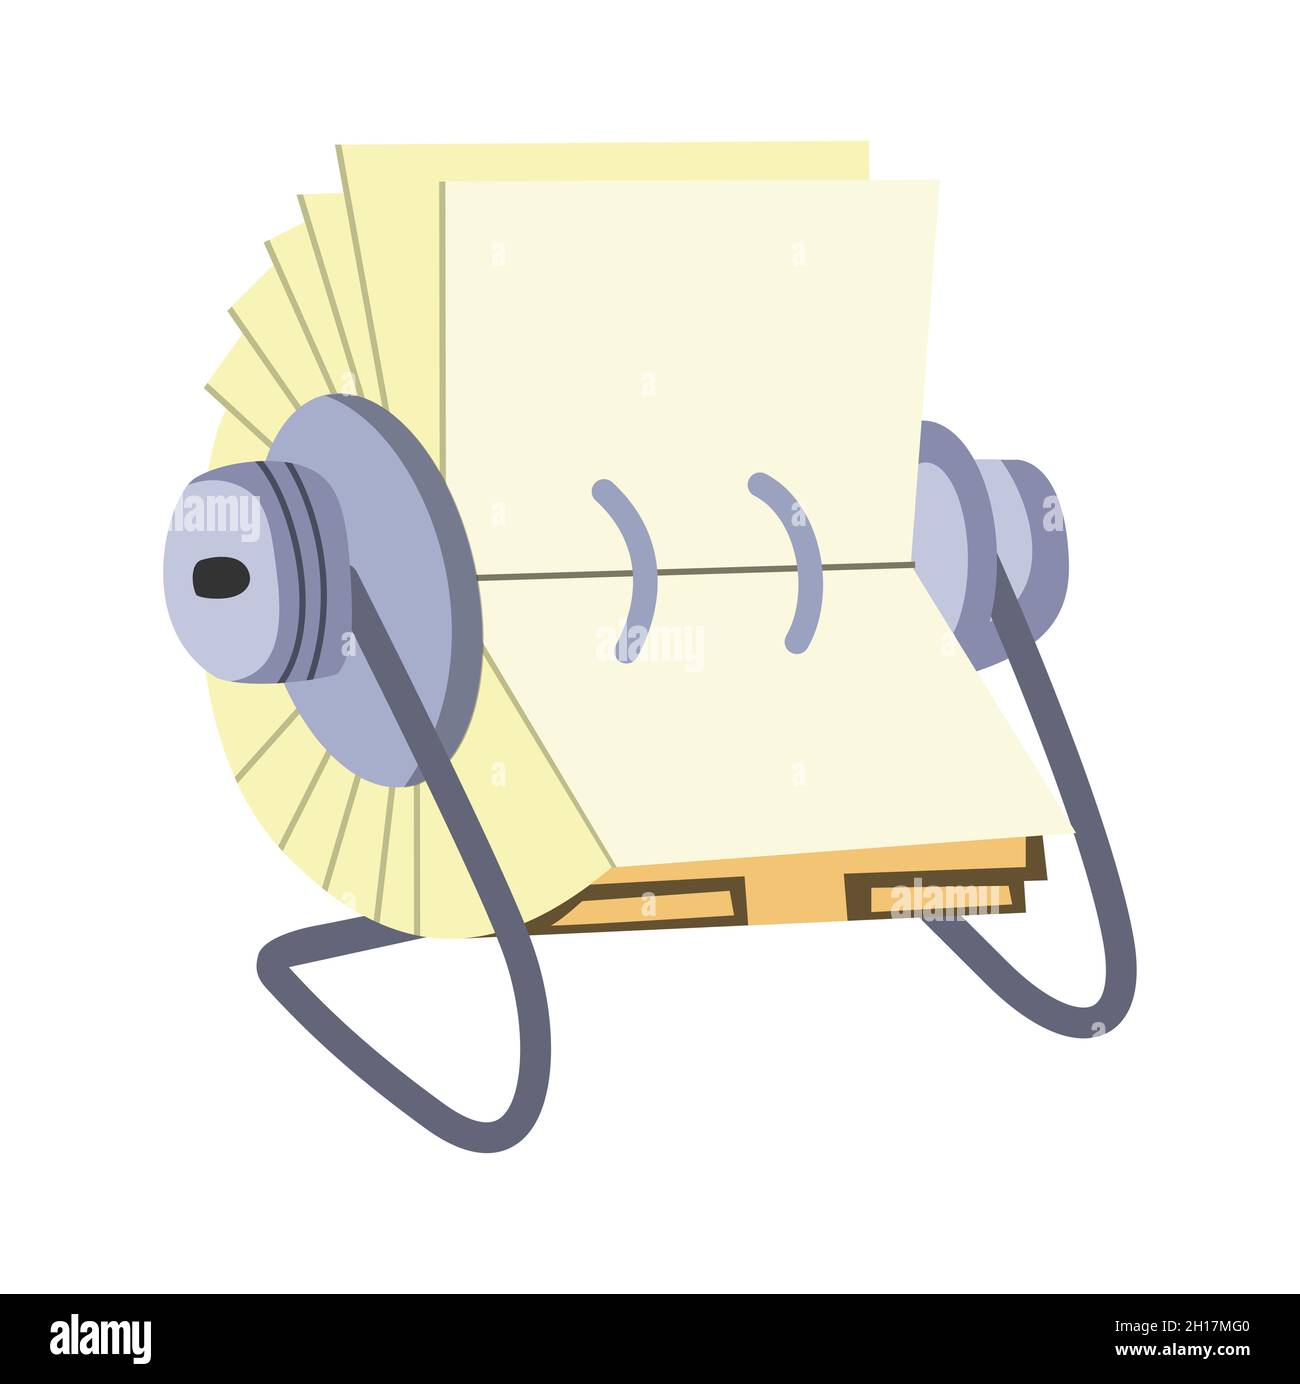 Storage Rolodex, accompanied by flat design illustrations Stock Vector